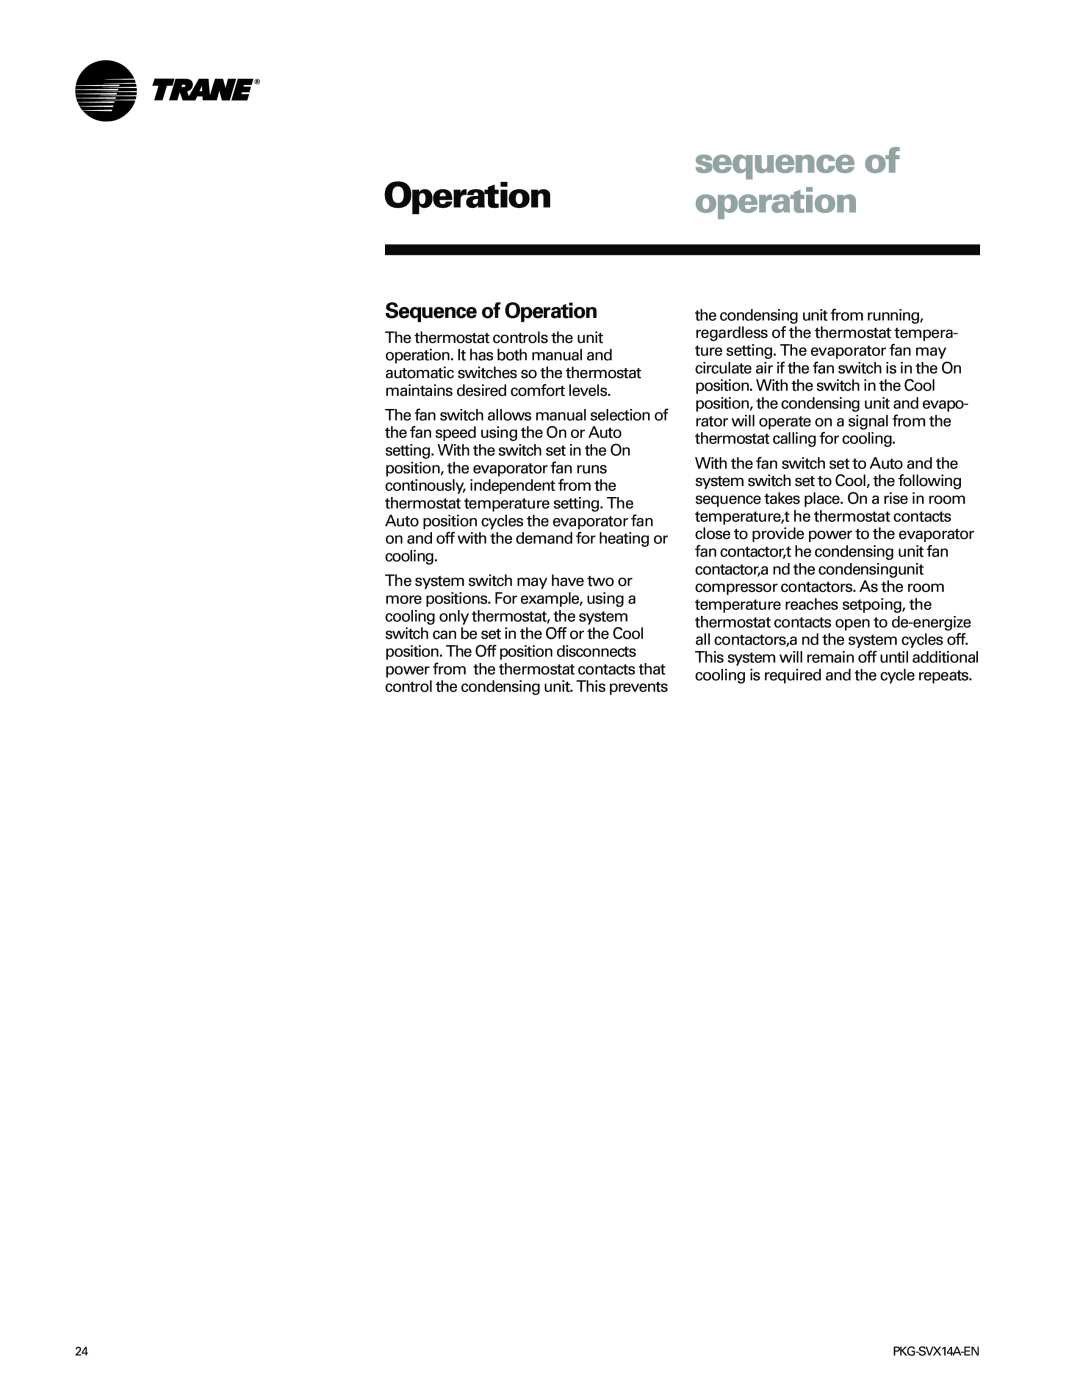 Trane SCWH, SCRH manual sequence of, Operation operation, Sequence of Operation 